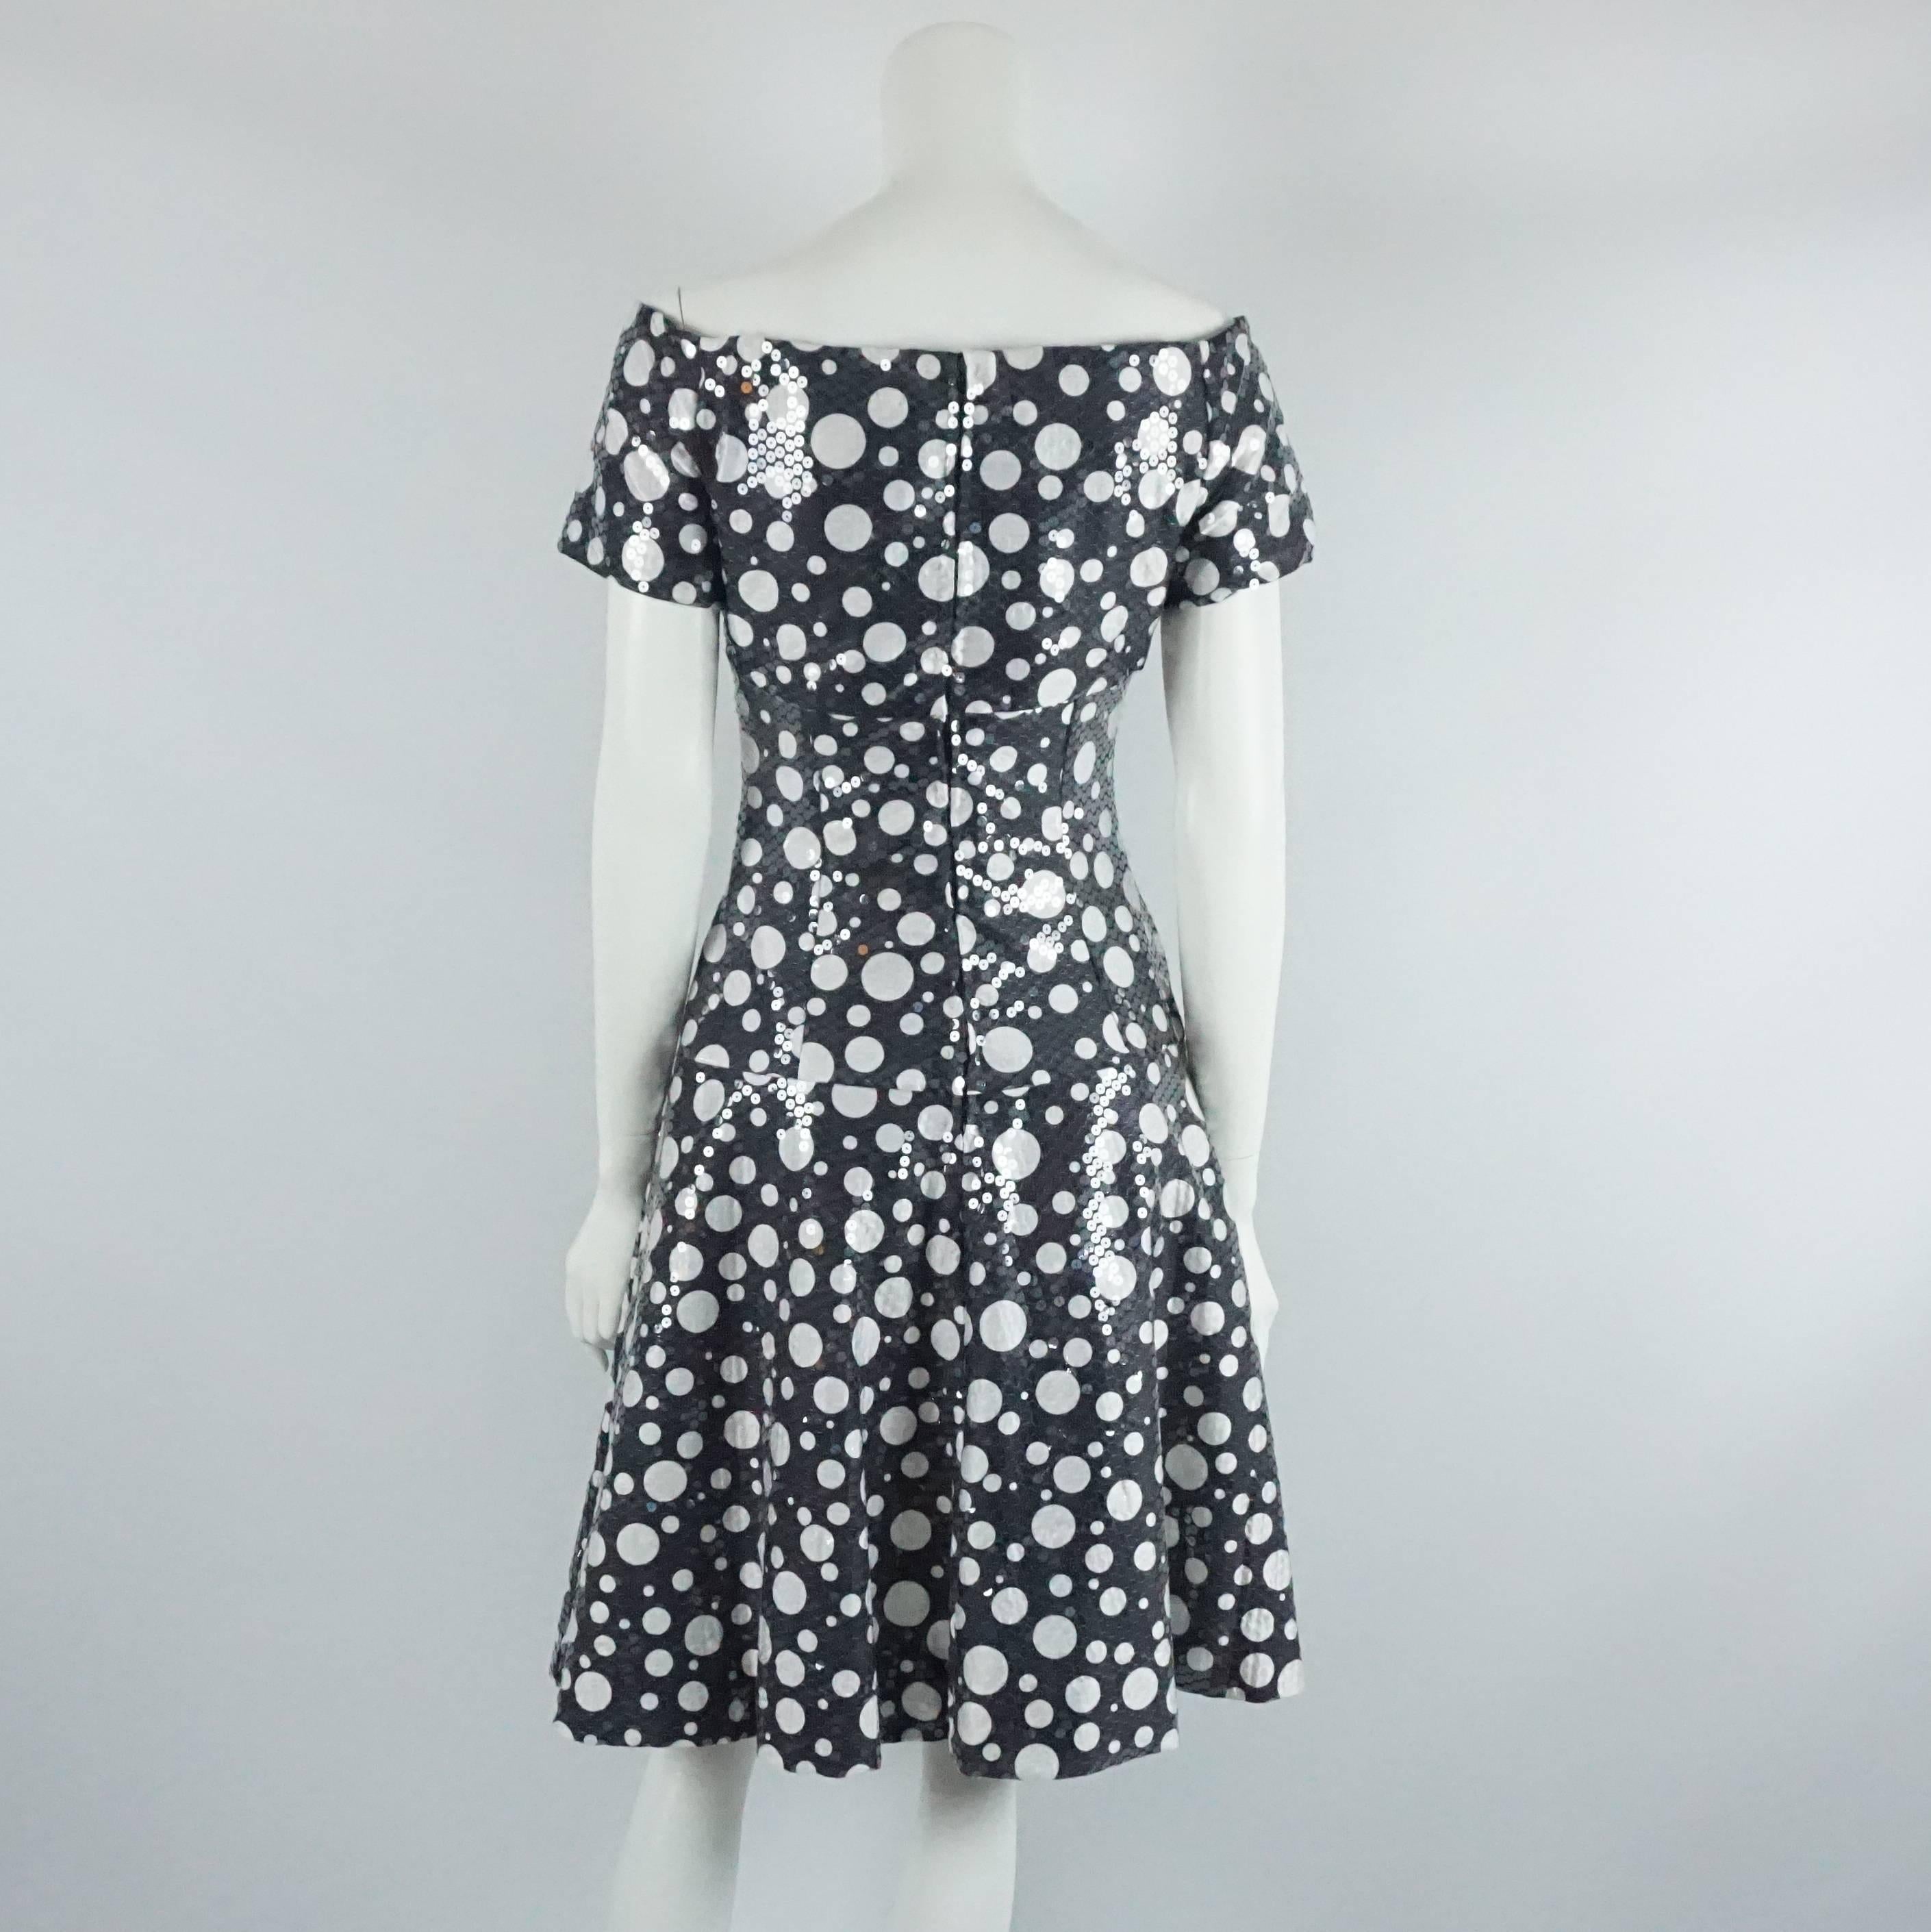 Scaasi Black and White Polka Dot Sequin Dress - S - 1980's In Good Condition For Sale In West Palm Beach, FL